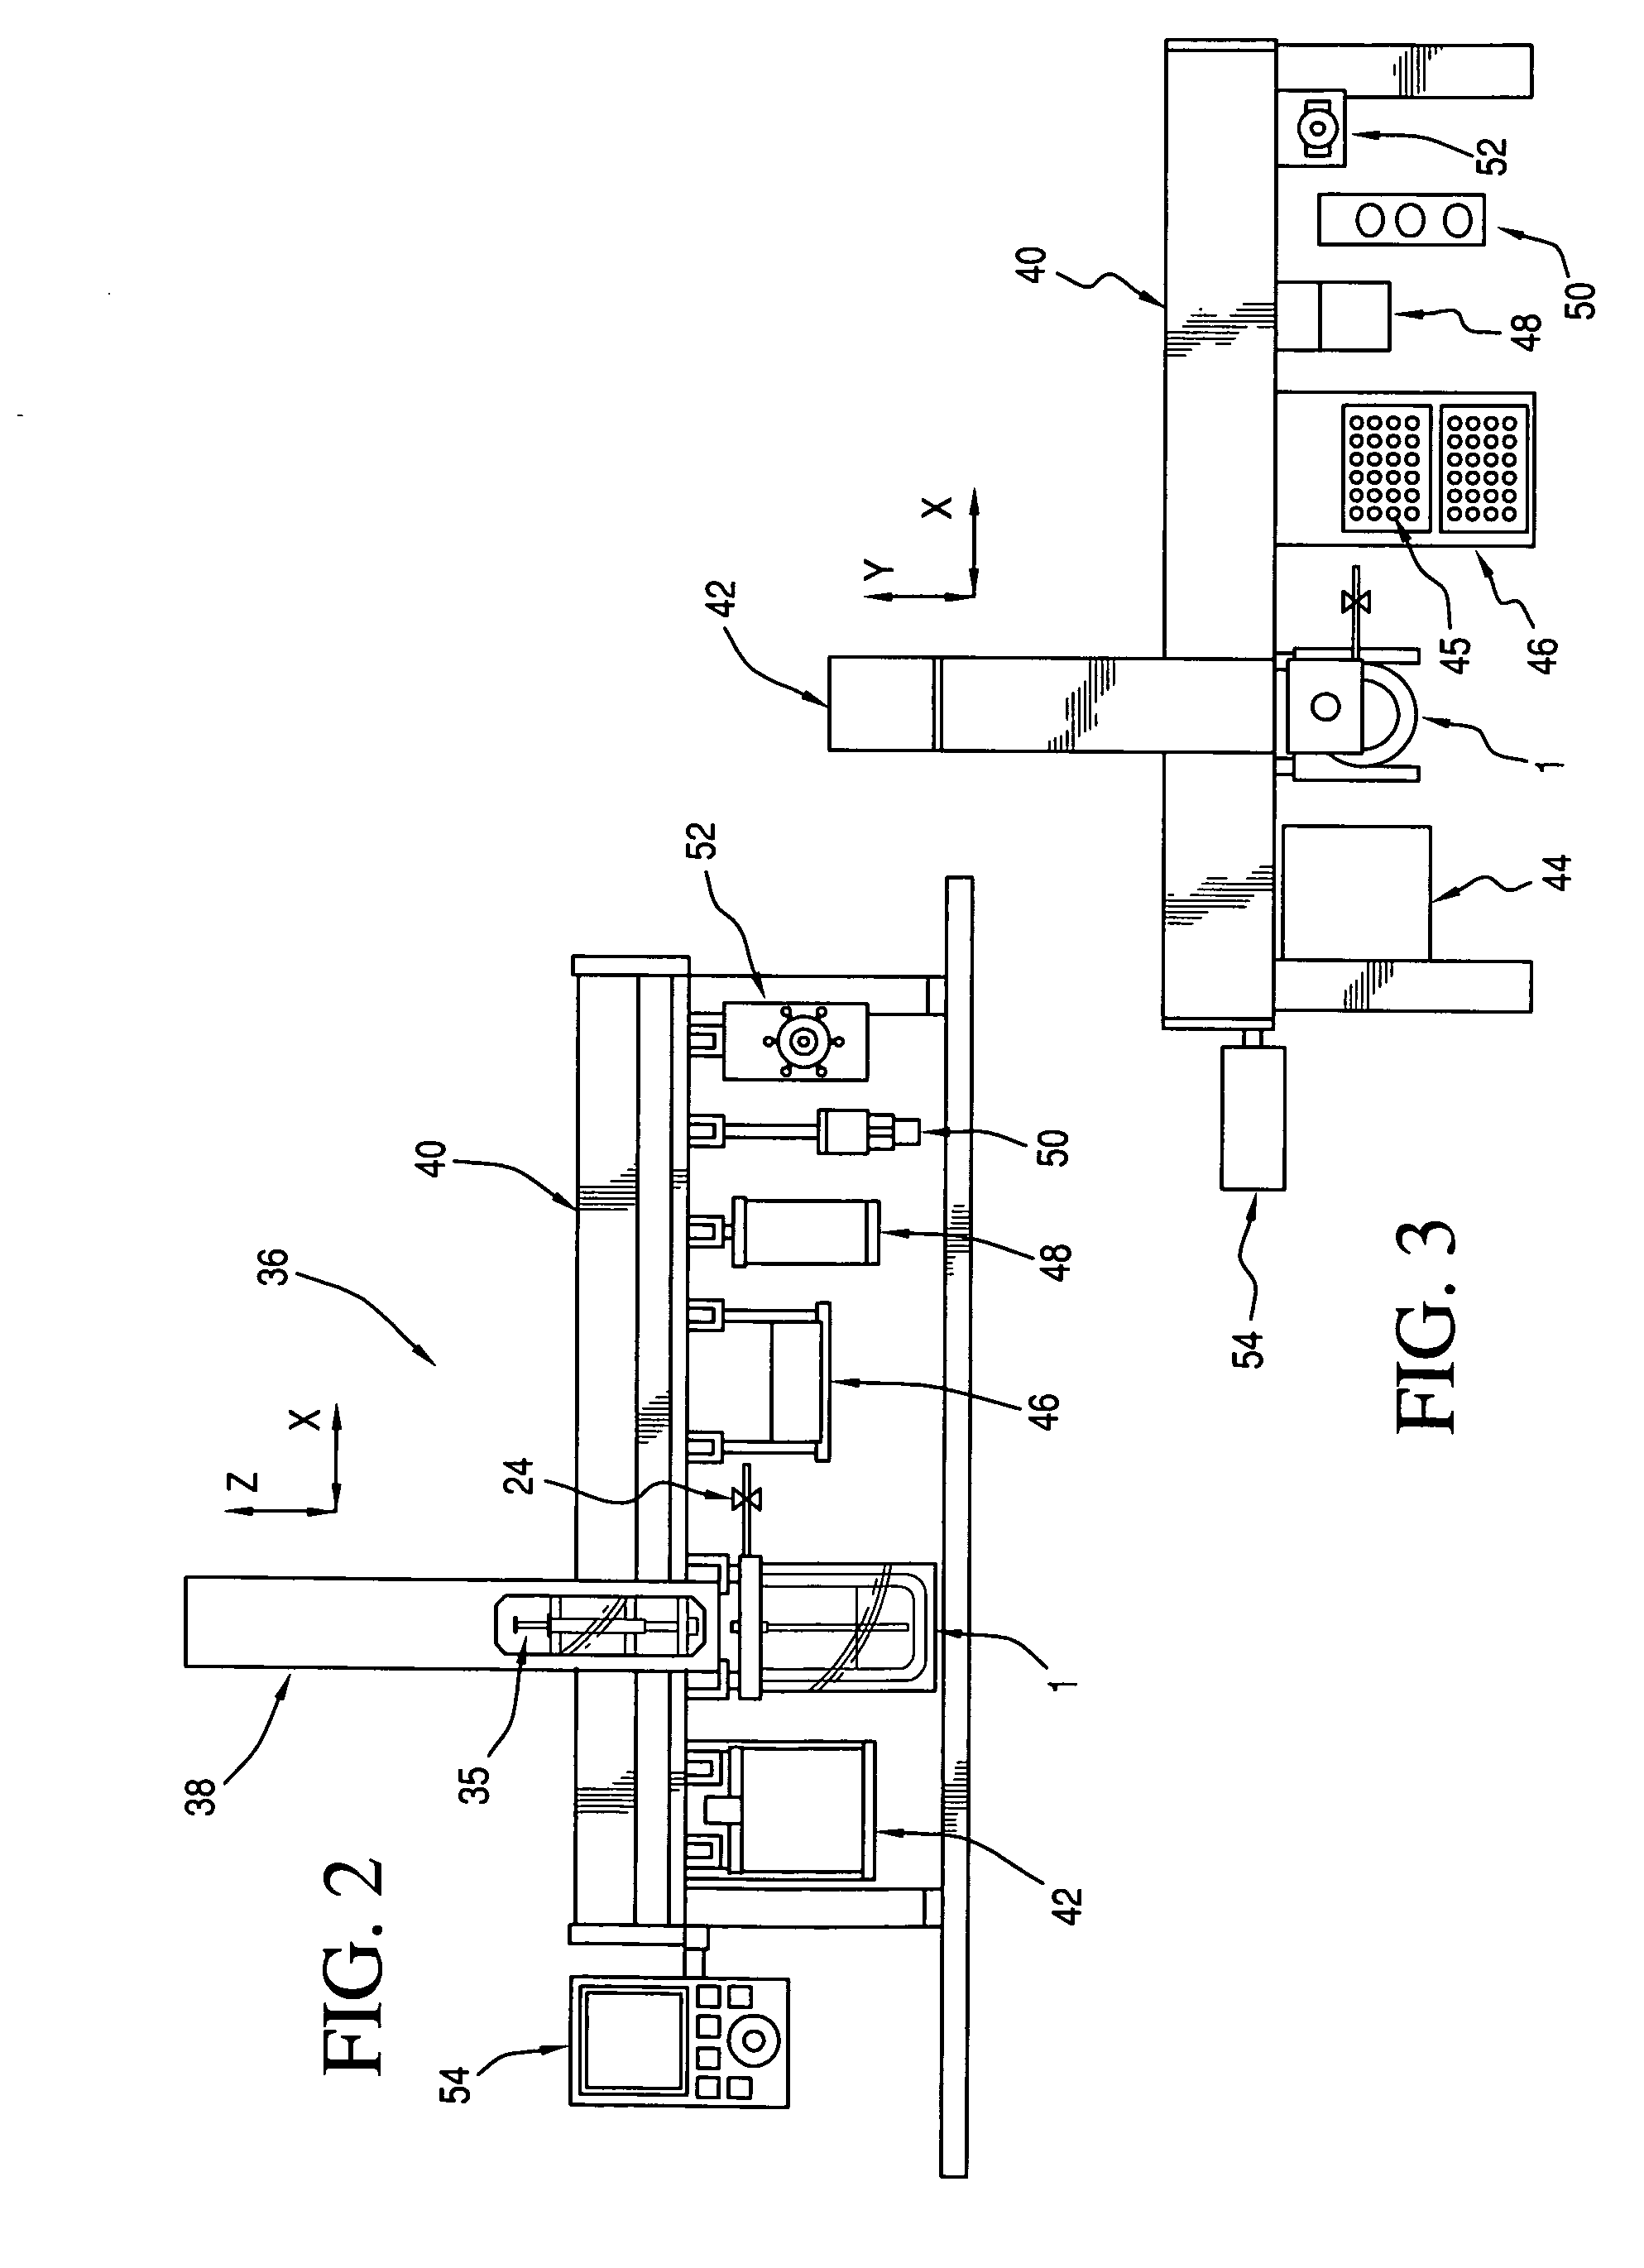 Shock freezer and system for preparing samples for analysis using the same